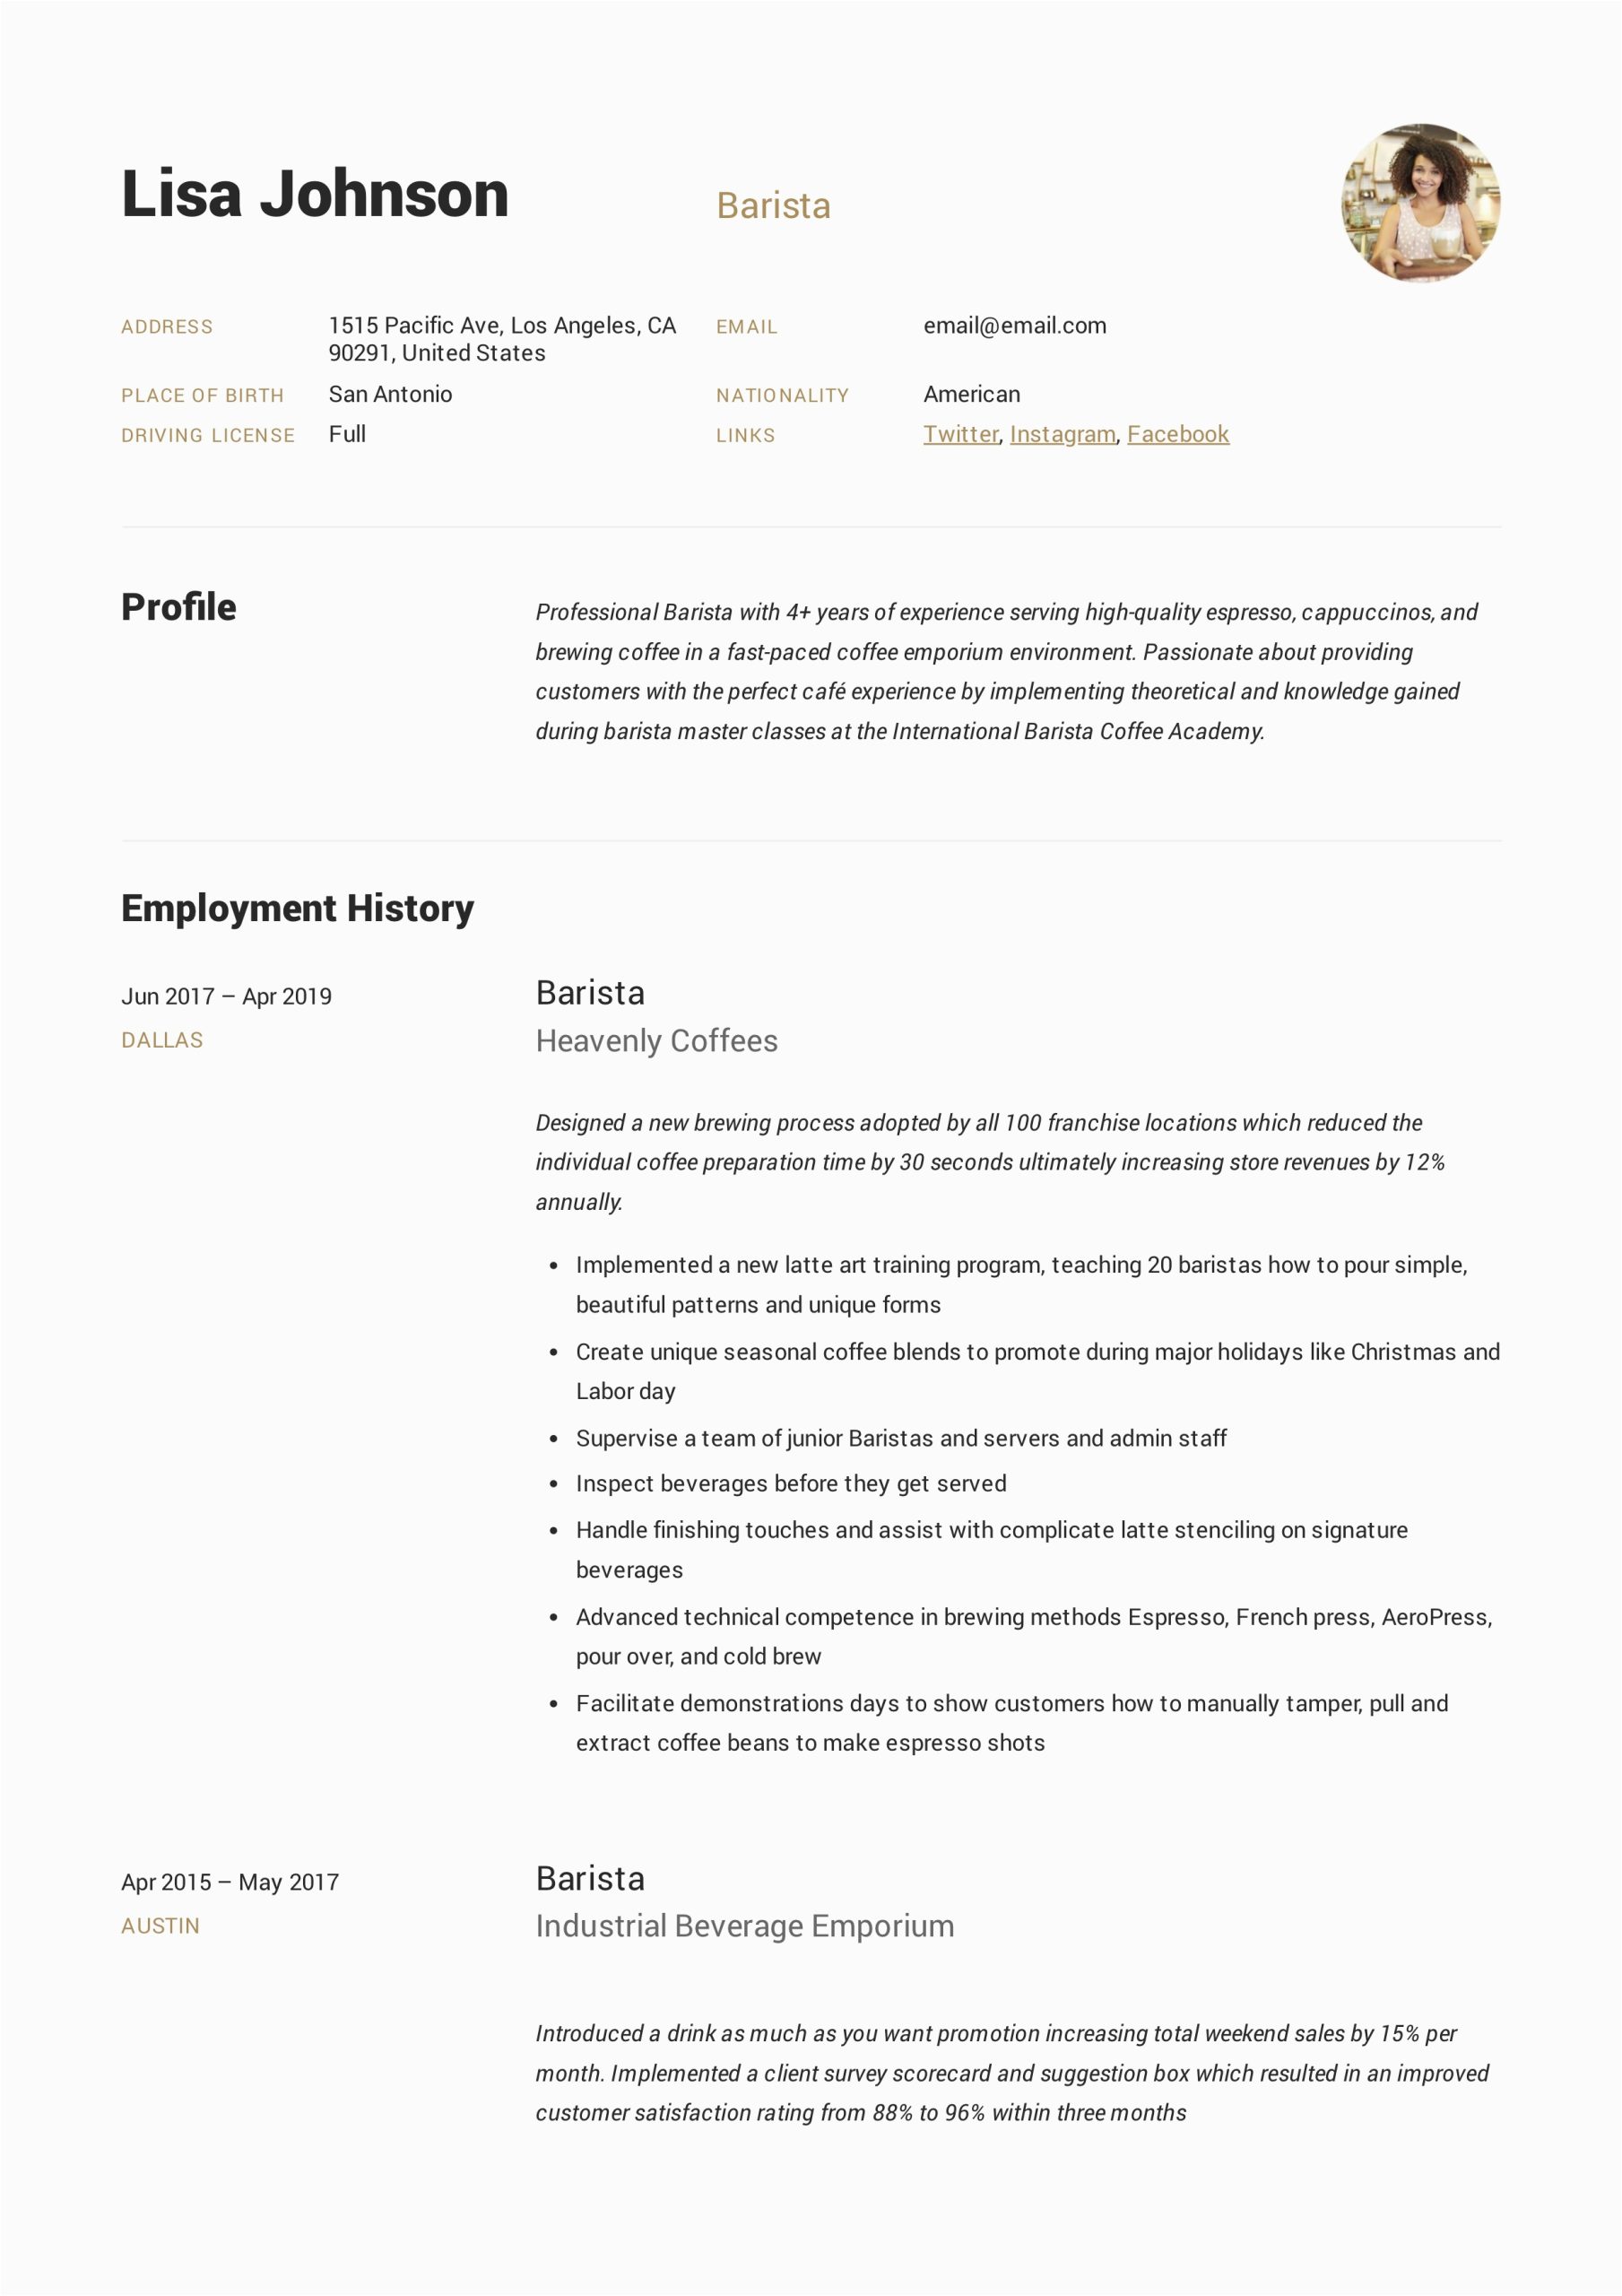 Sample Resume for Coffee Shop Barista Barista Resume & Writing Guide 12 Resume Templates